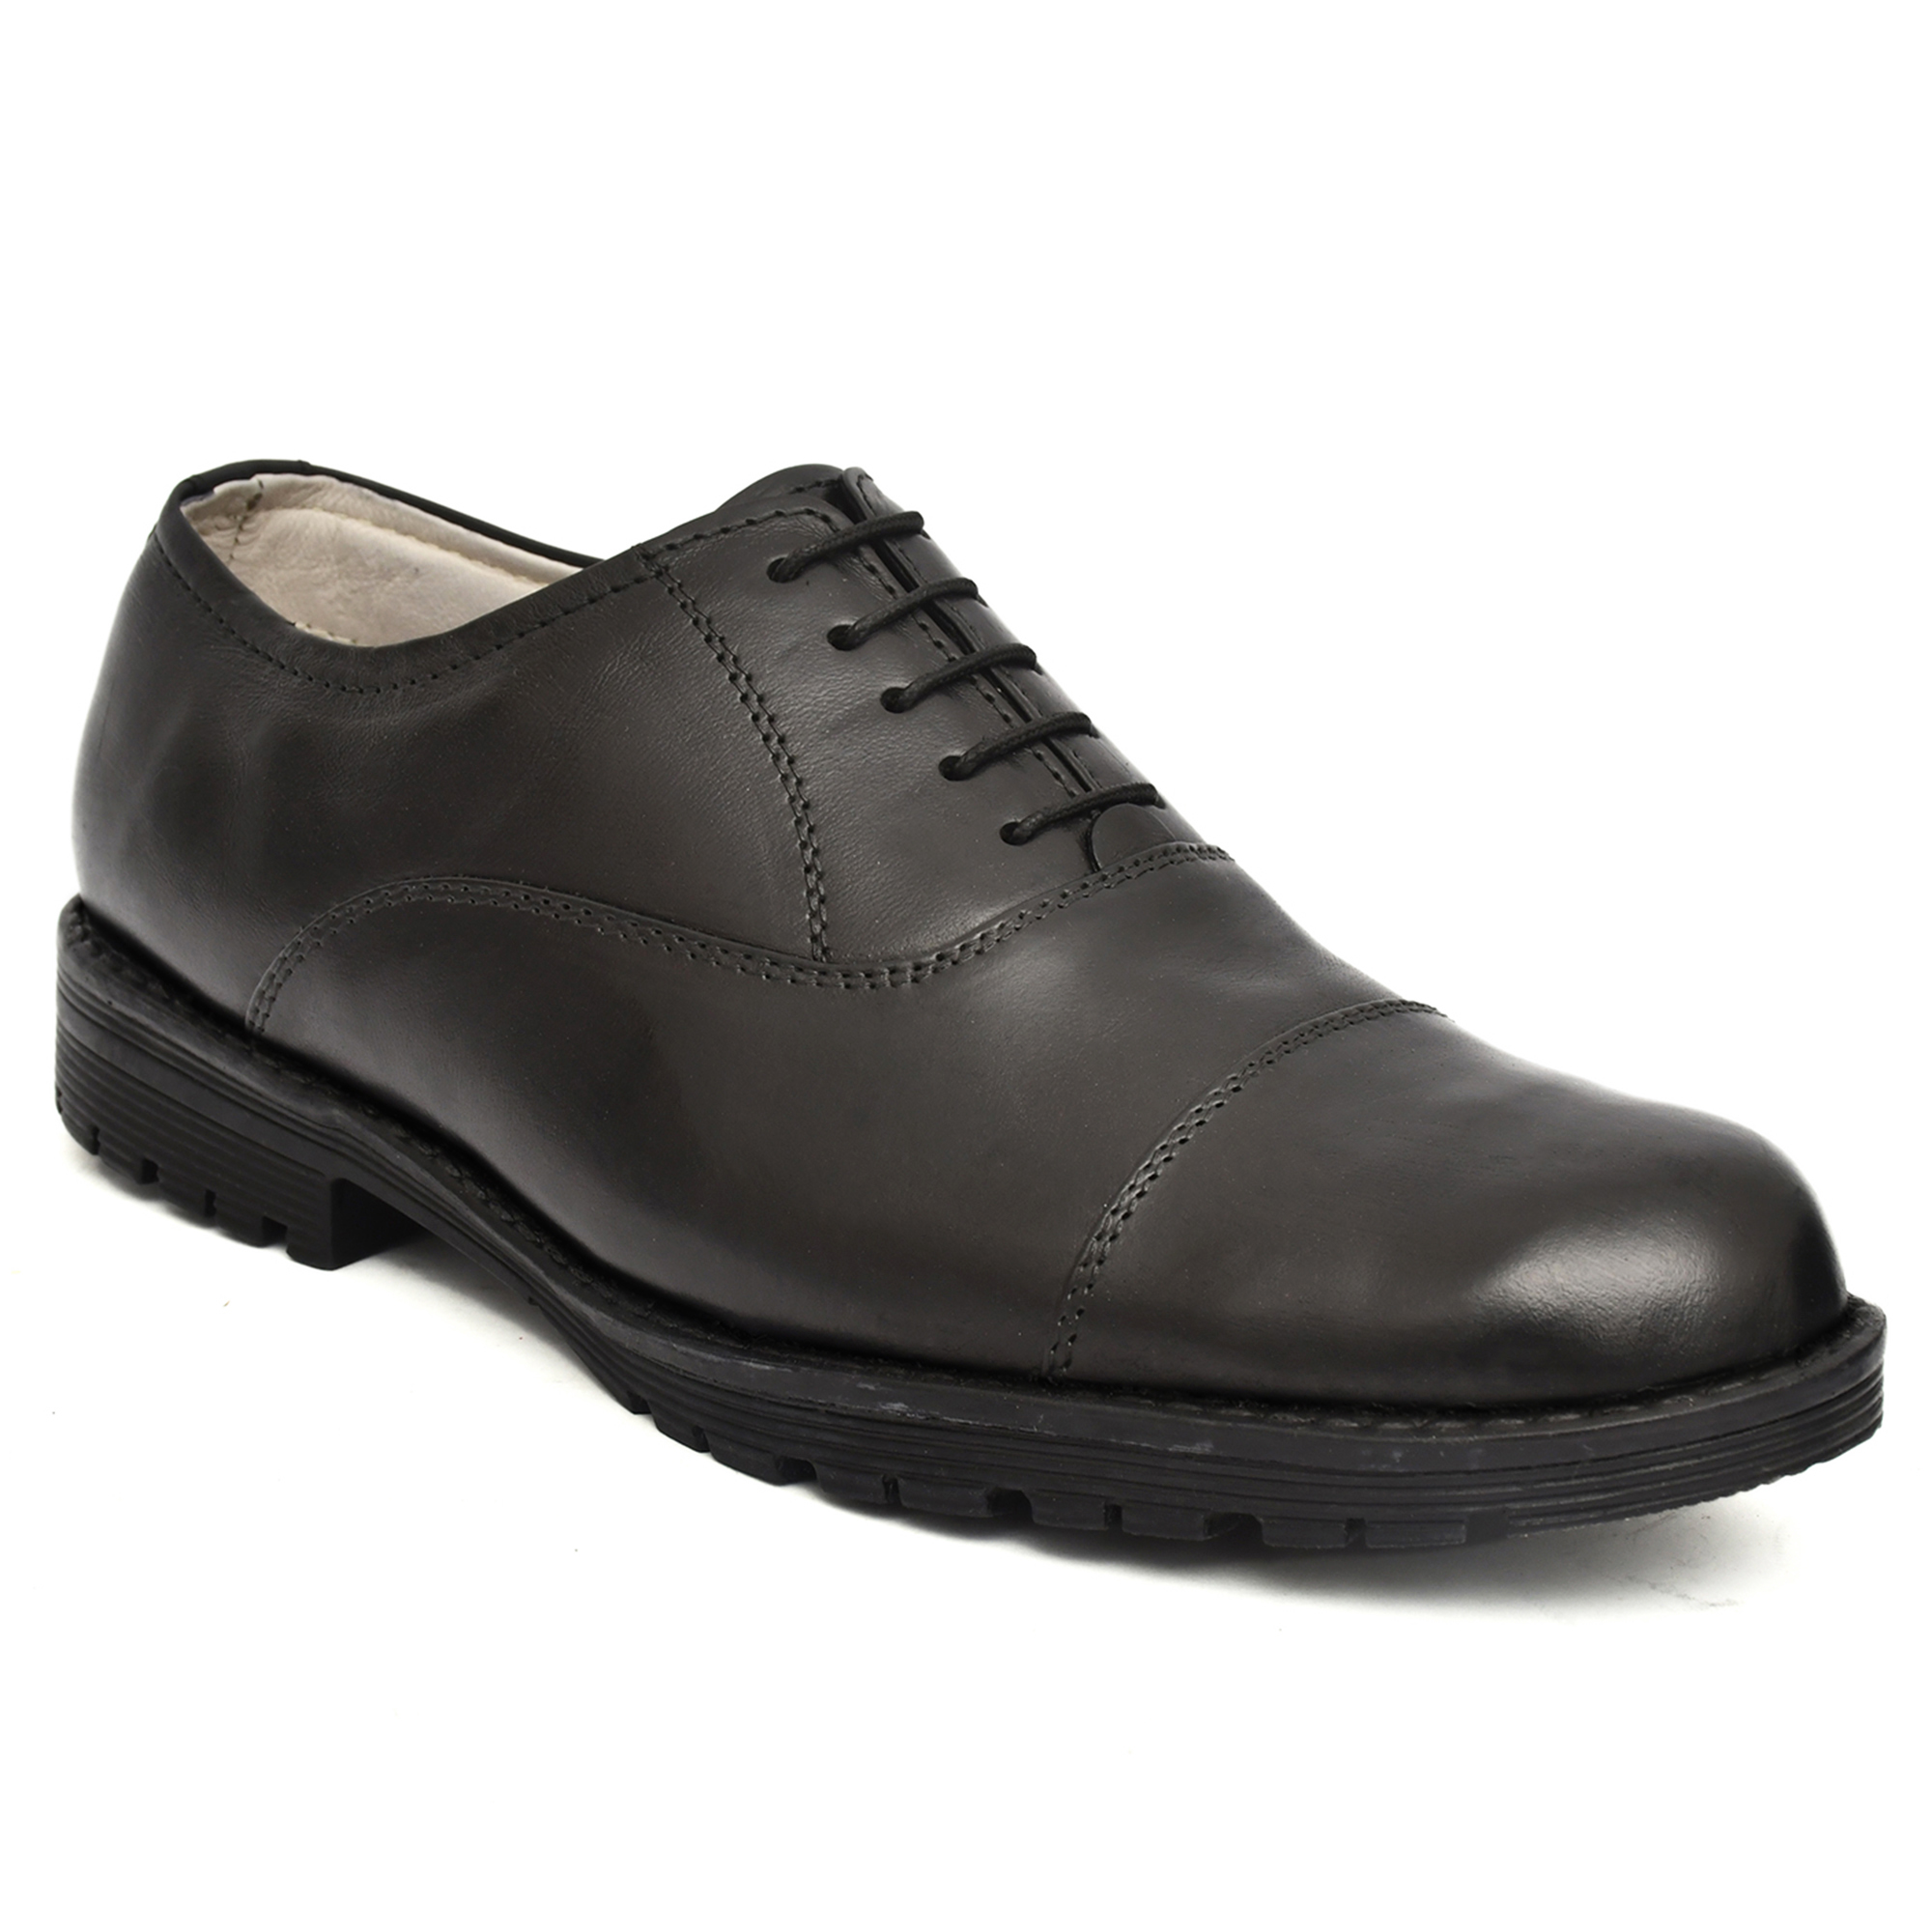 Safety Shoes: Buy Industrial Safety formal Black Leather Oxford Shoes Online. Article: S110-Black